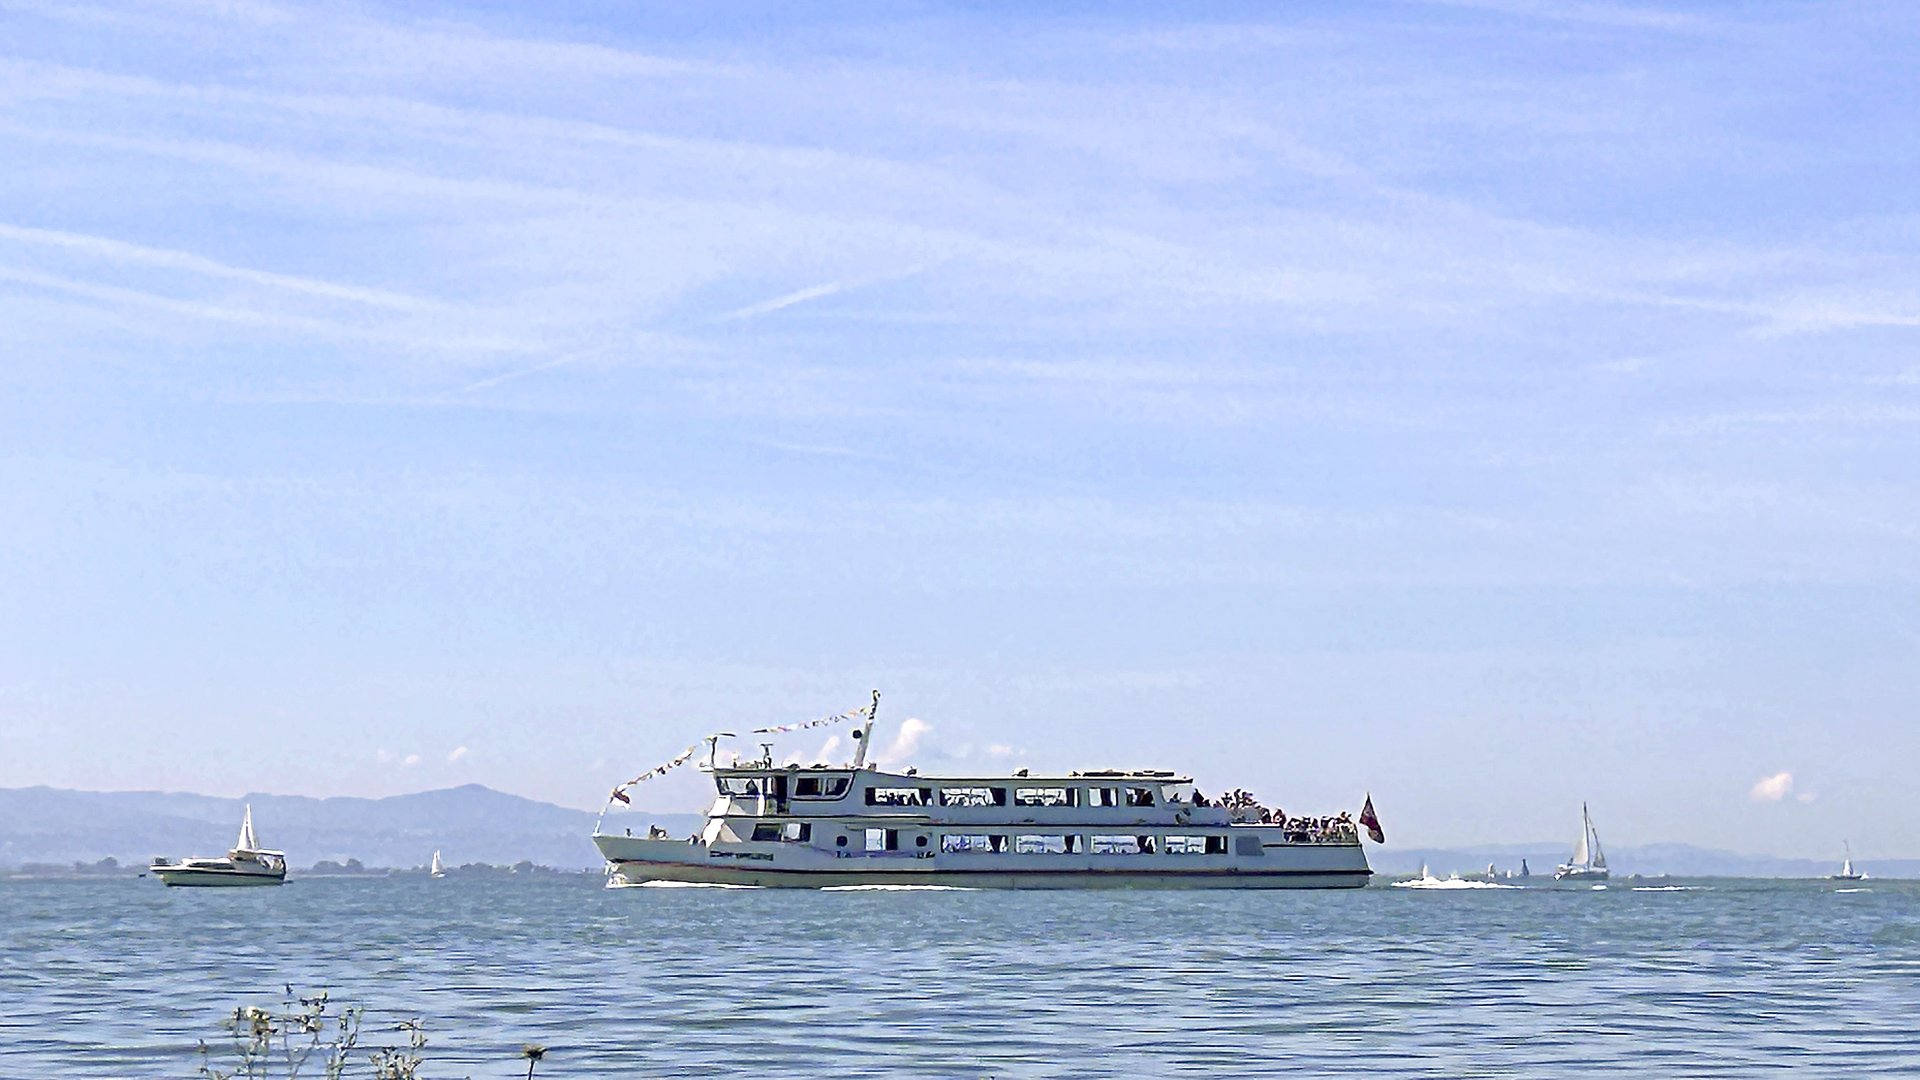 Boat trip on Lake Constance